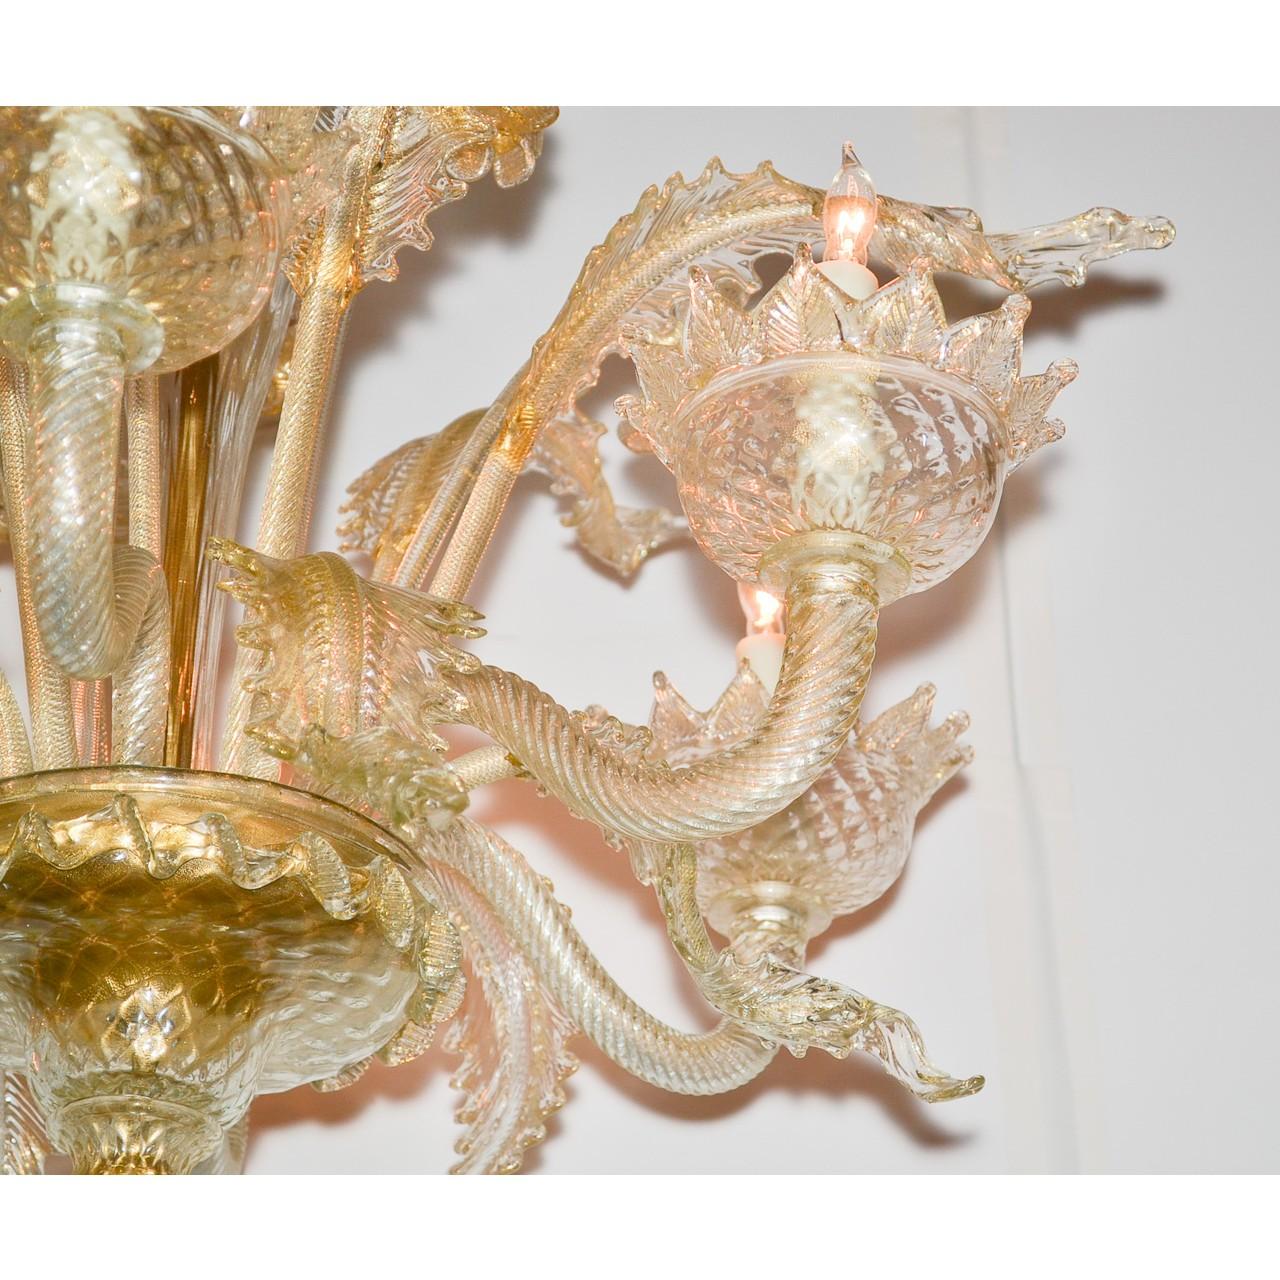 Fanciful and fine Venetian chandelier in hues of amber to clear glass. The bowl-shaped canopy with a flower petal border atop long shaped and ruffled leaf sprays accented large flower heads. Mounted with gracefully contoured arms having cup-shaped